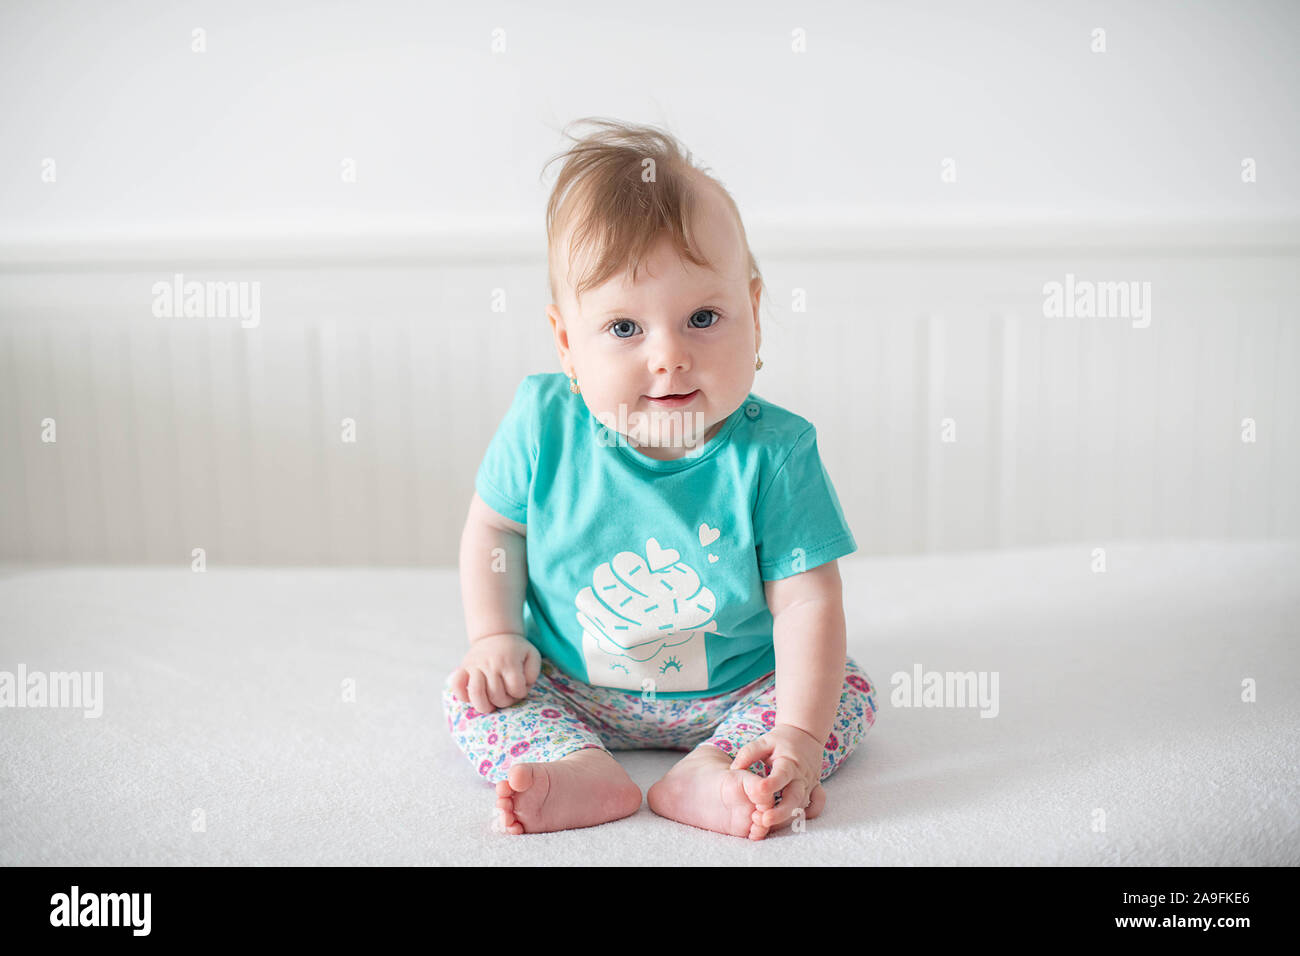 Portrait of adorable Caucasian baby girl with blue eyes, looking at the camera calmly, with curiosity, interactivity or inquisitiveness Stock Photo